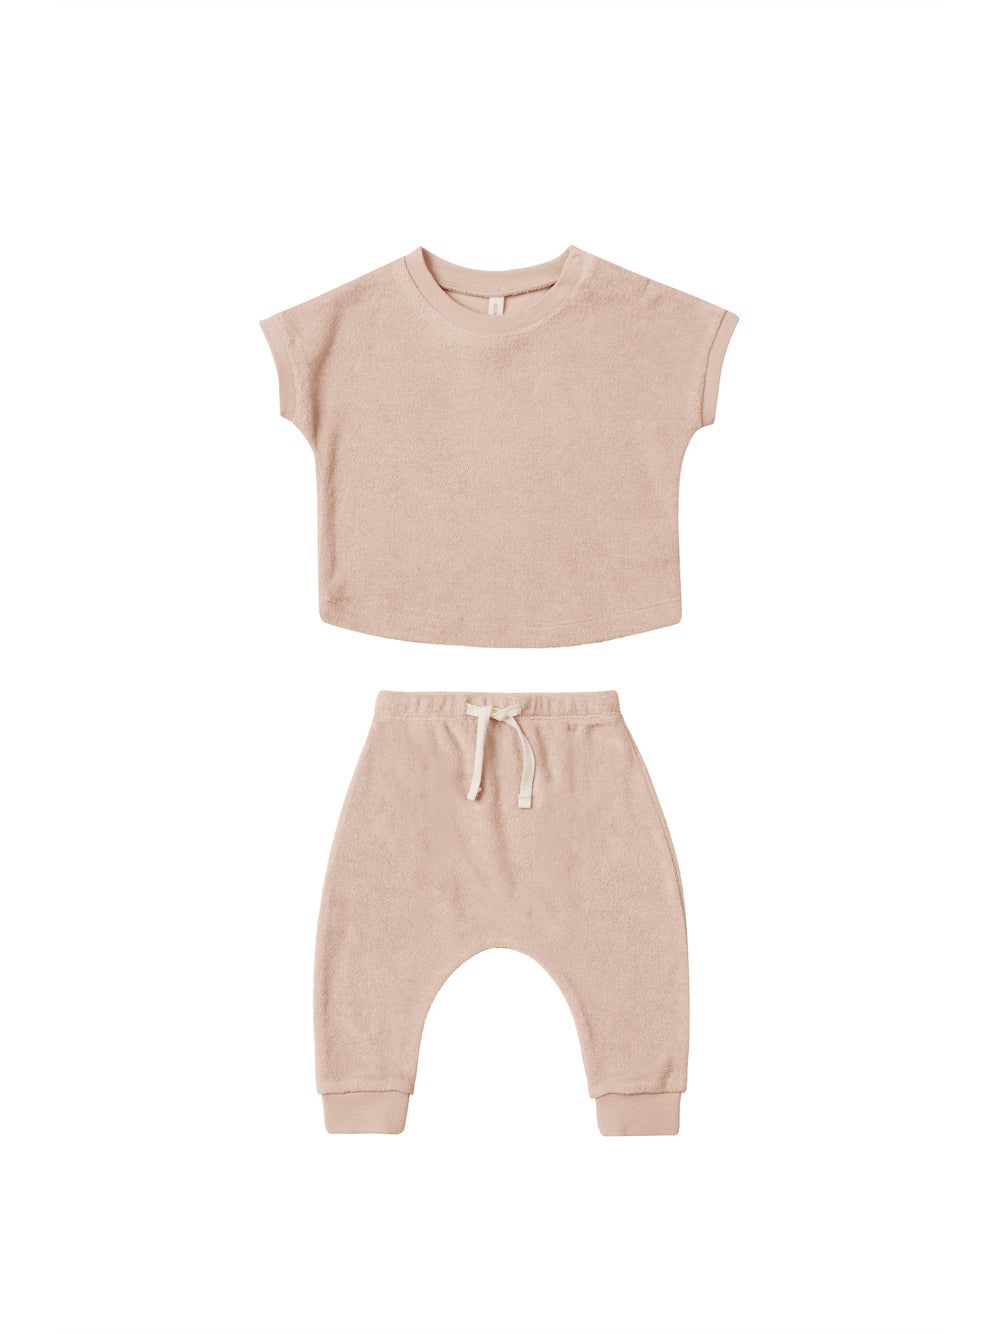 Quincy Mae Terry Tee + Pant Set - Blush